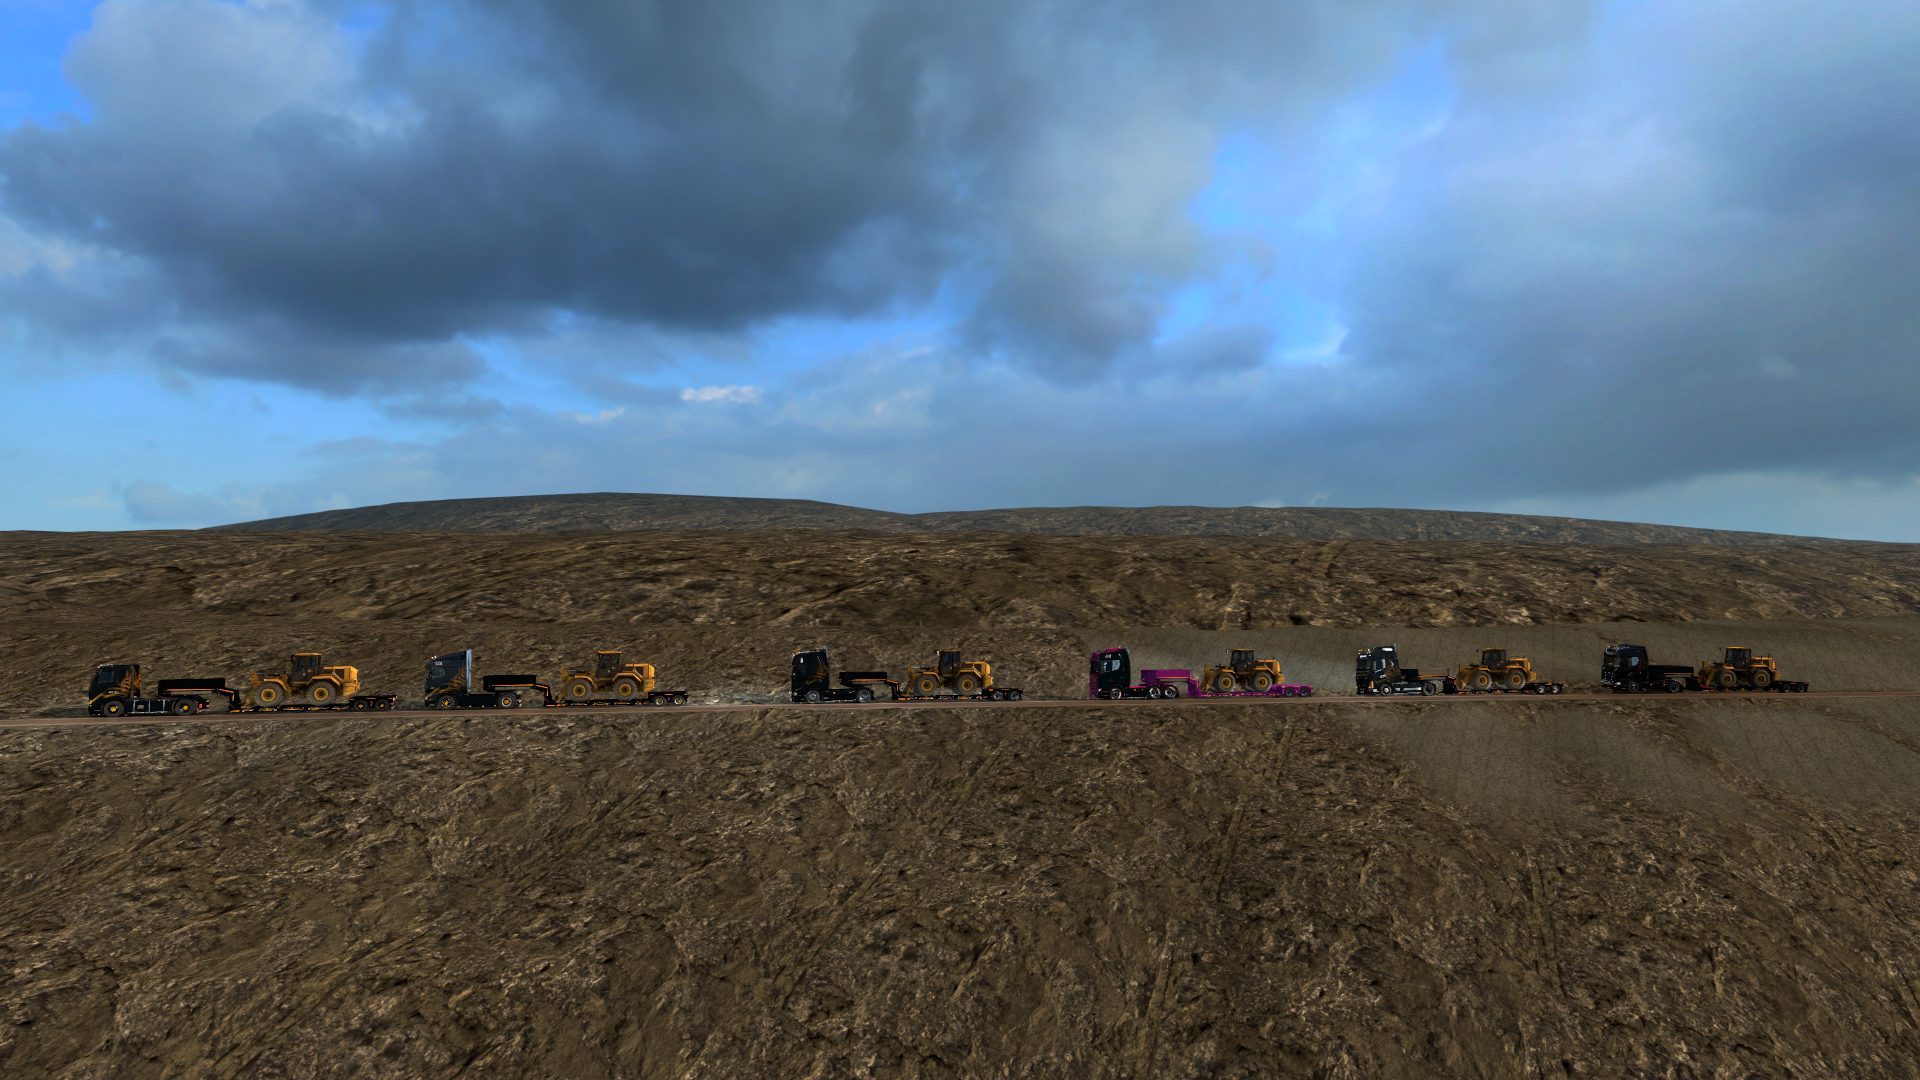 ets2_20210320_234546_00.png